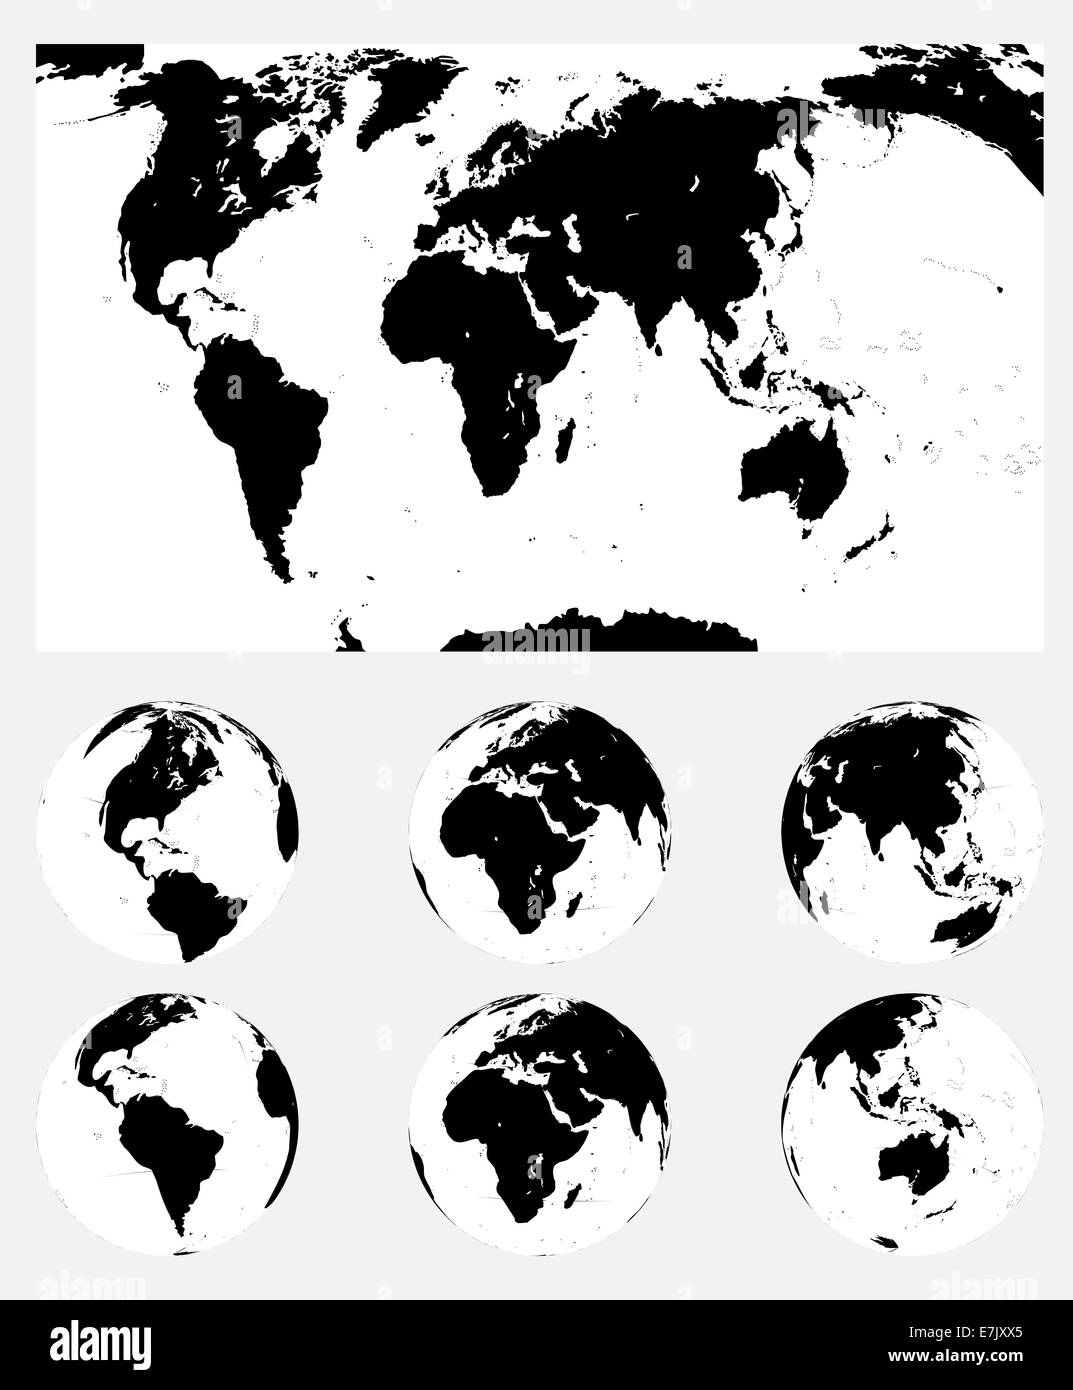 Map Of The World. Vector Illustration. Stock Photo